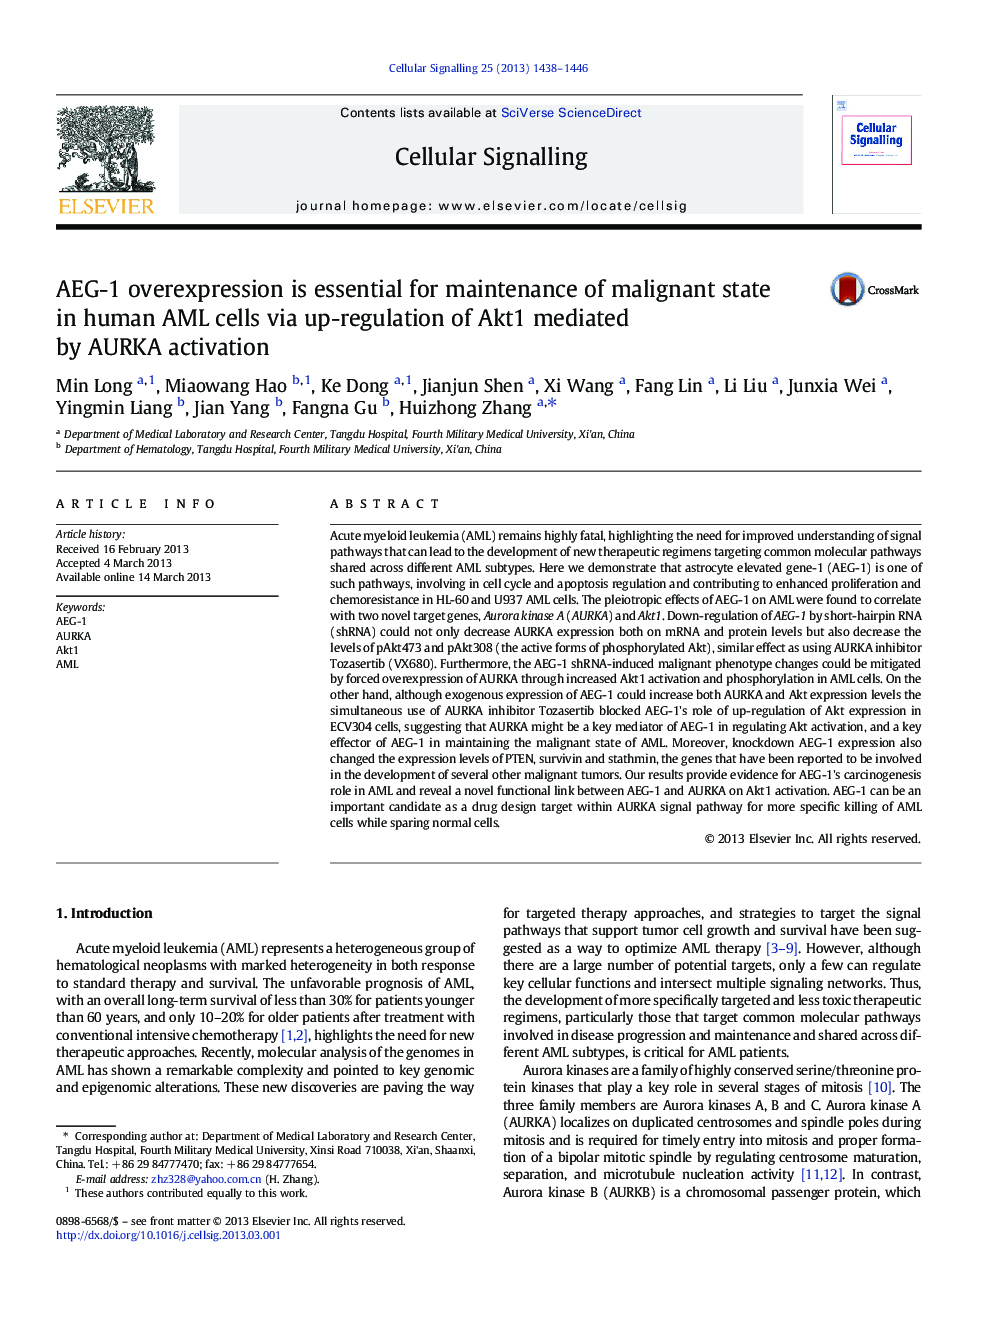 AEG-1 overexpression is essential for maintenance of malignant state in human AML cells via up-regulation of Akt1 mediated by AURKA activation